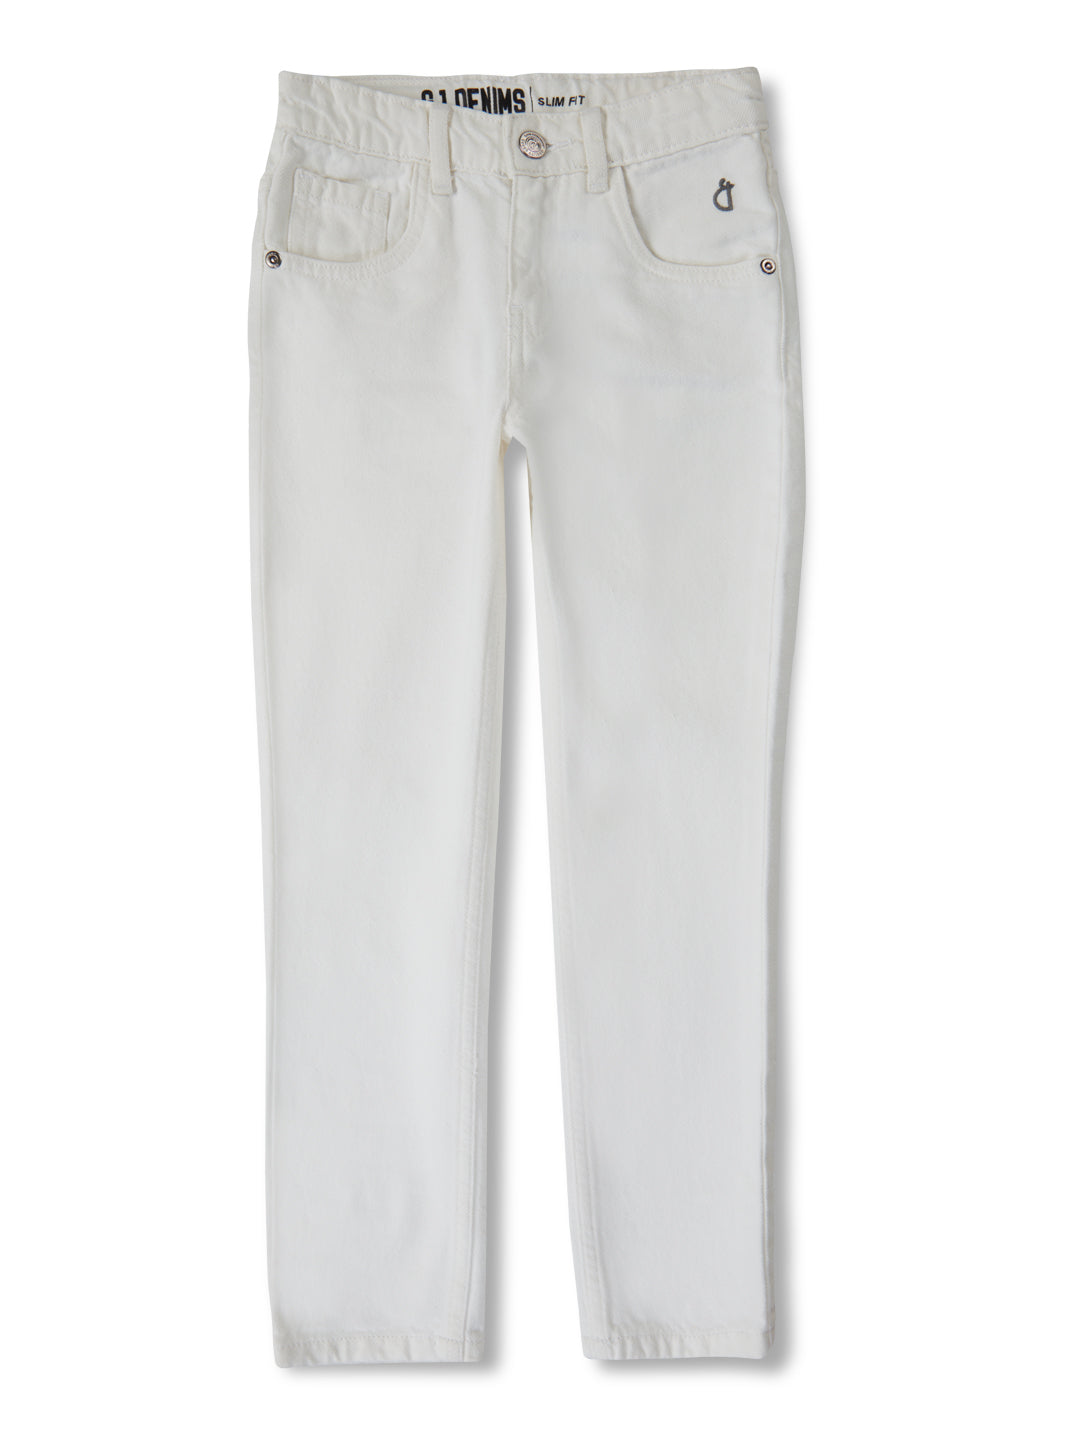 Boys White Solid Cotton Jeans Fixed Waist